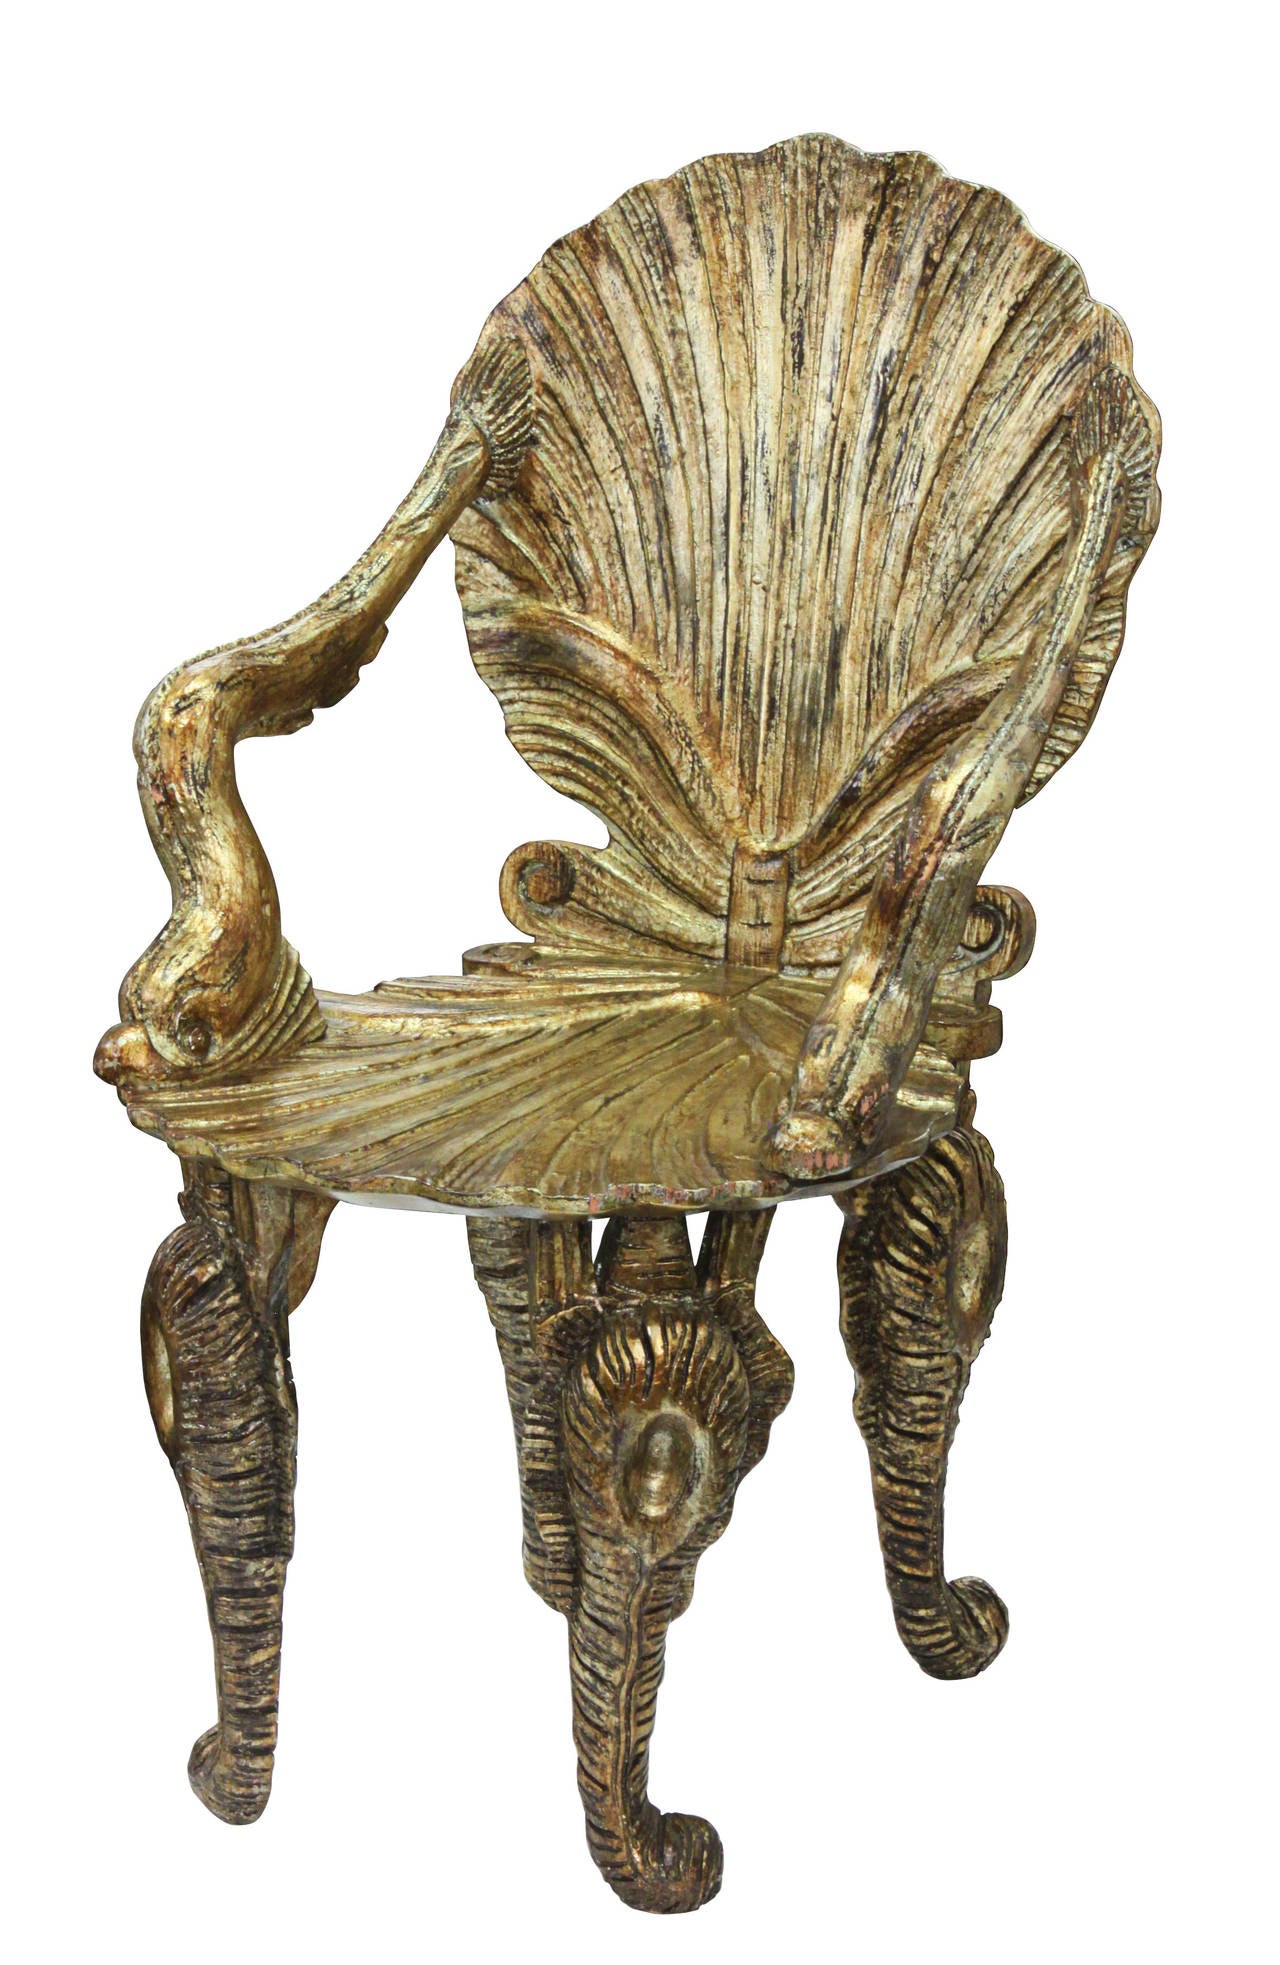 Set of six hand-carved gilded wood grotto chairs, open clam shell motif by David Barrett for Circa, American, 1970s.